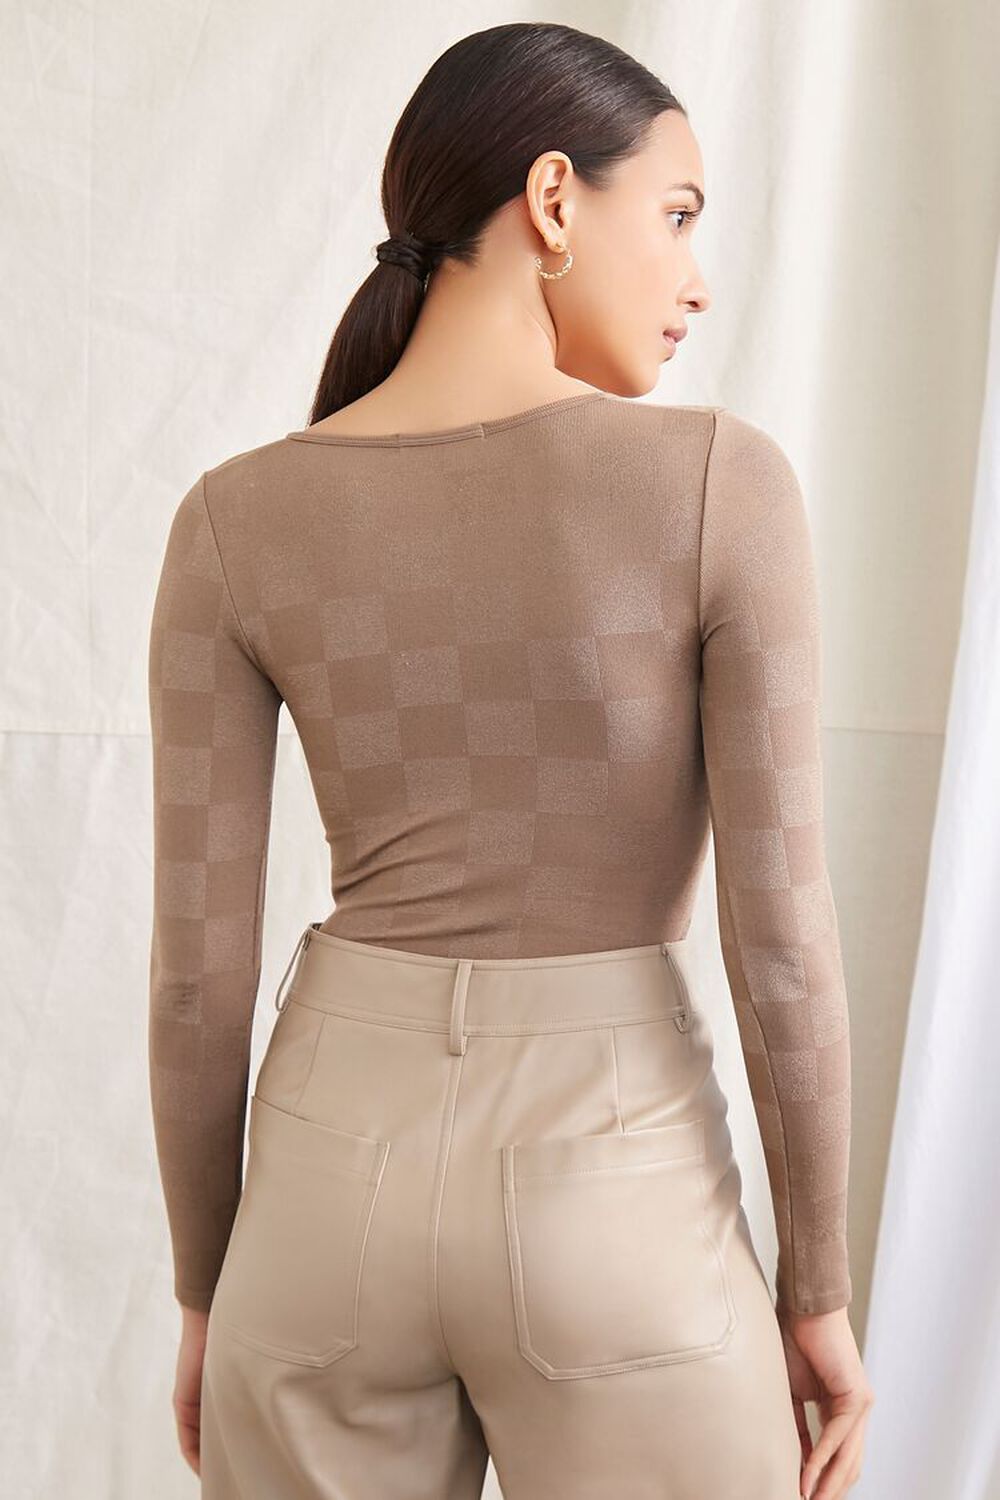 TAUPE Checkered Long-Sleeve Bodysuit, image 3